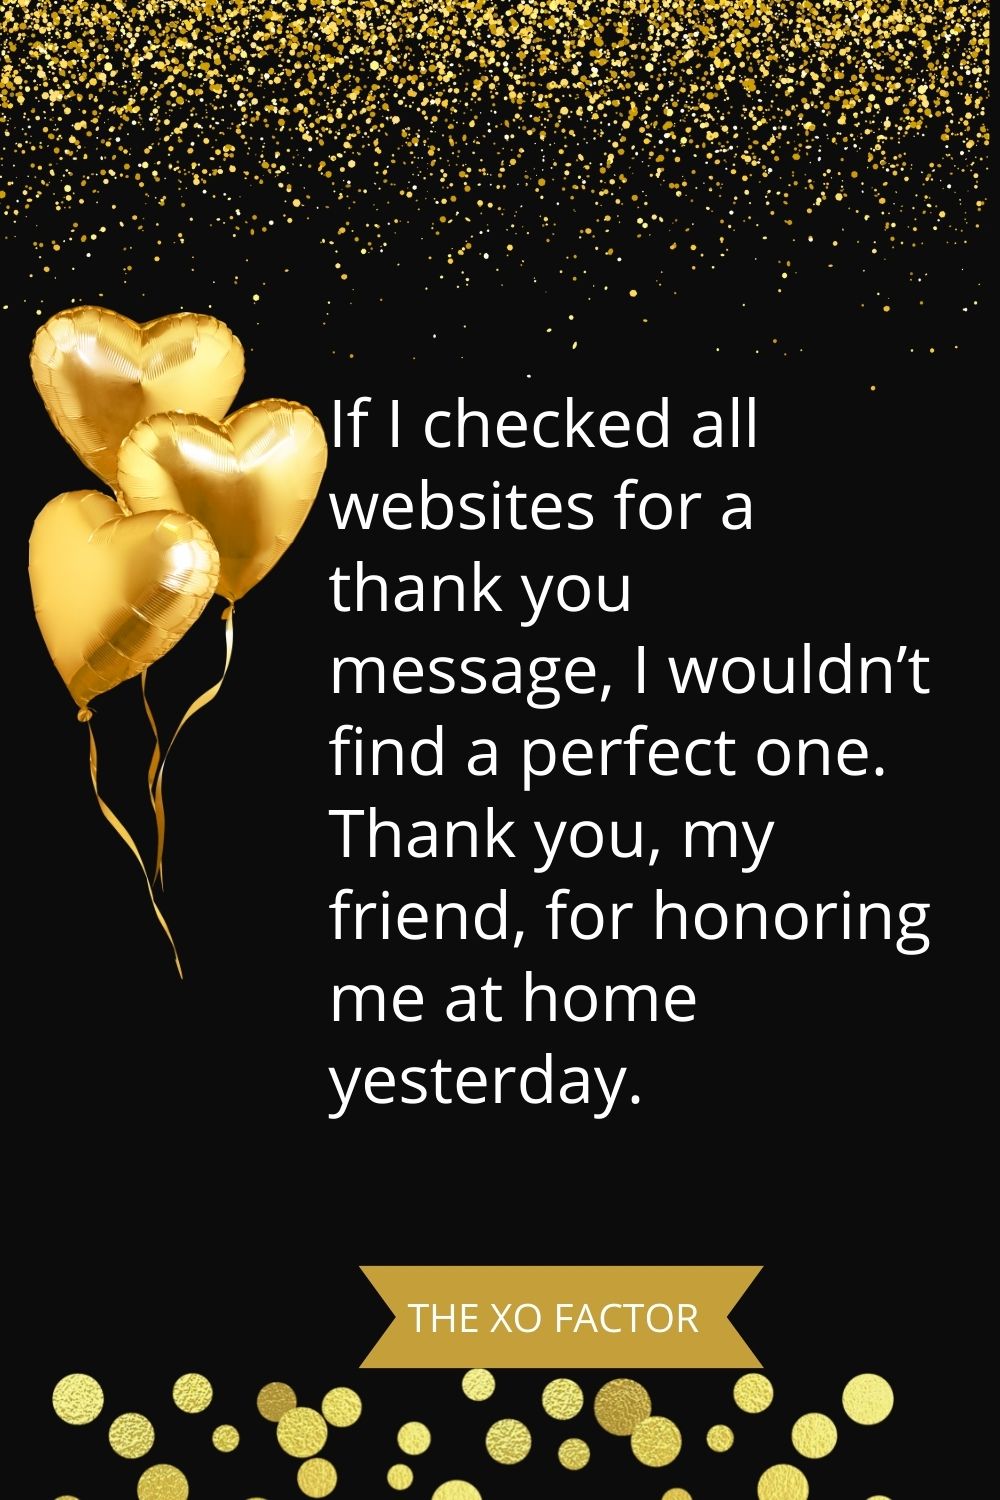 If I checked all websites for a thank you message, I wouldn’t find a perfect one. Thank you, my friend, for honoring me at home yesterday.